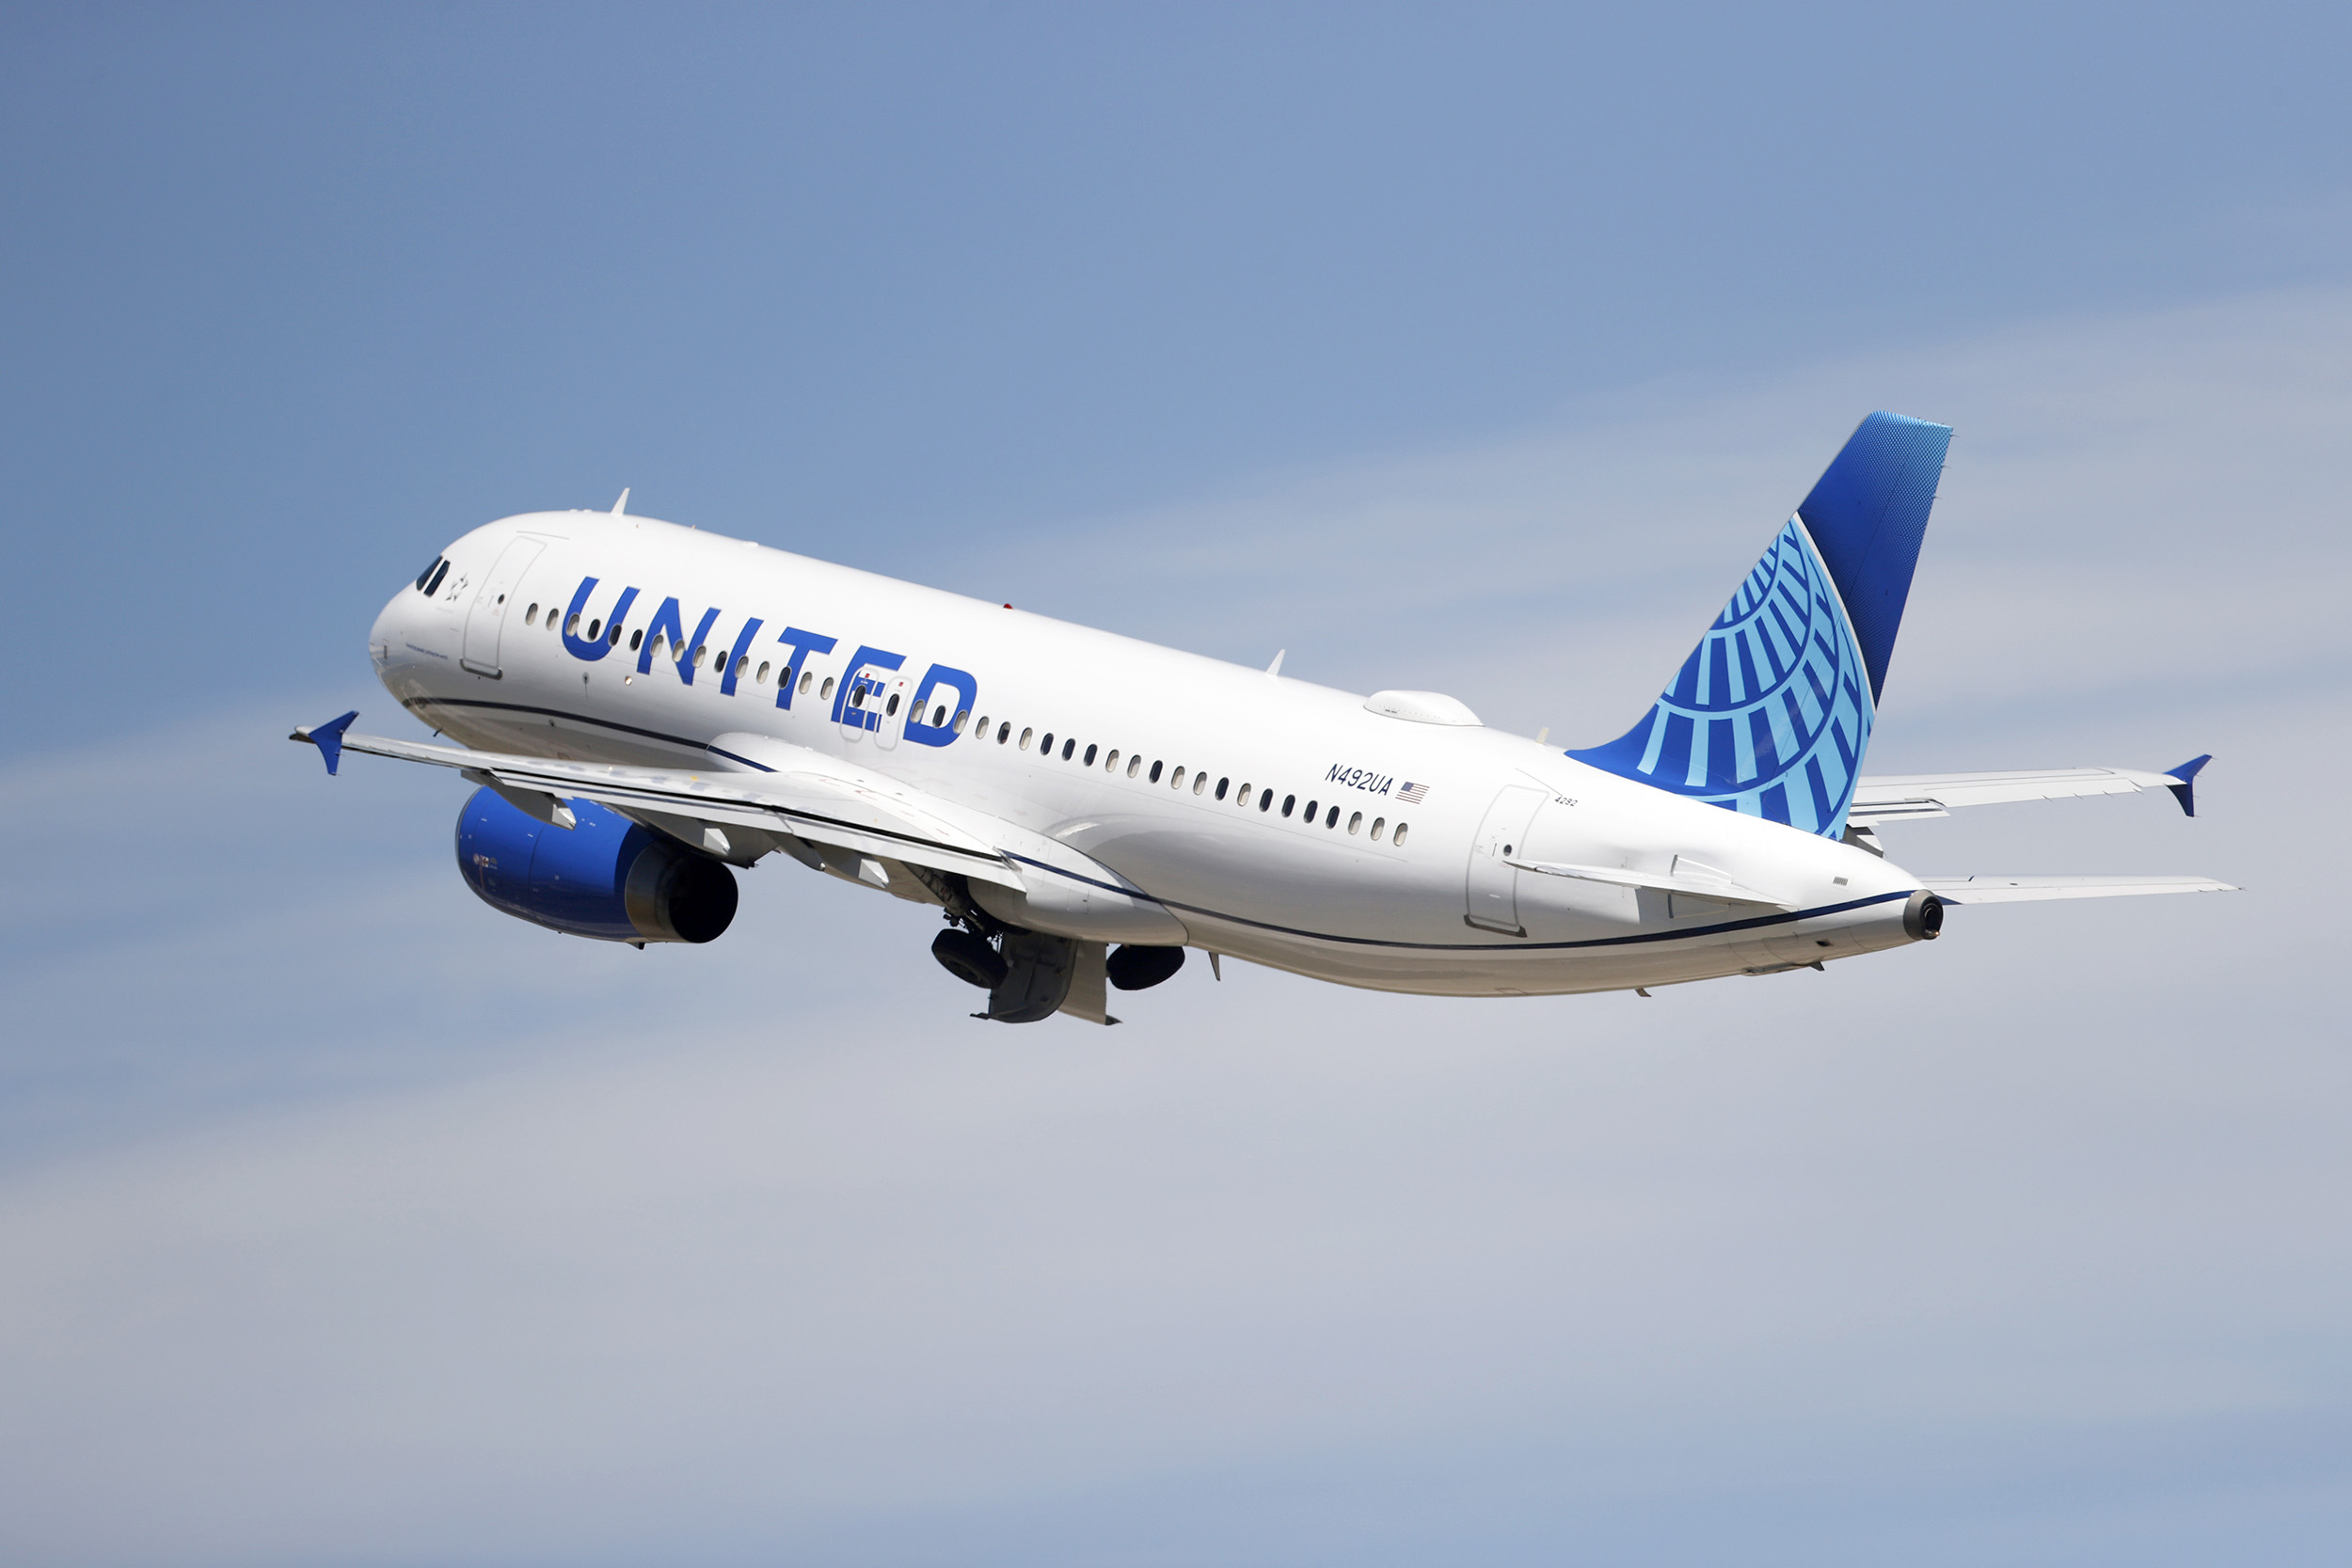 United Airlines issued nationwide ground stop due to ‘systemwide technology issue’